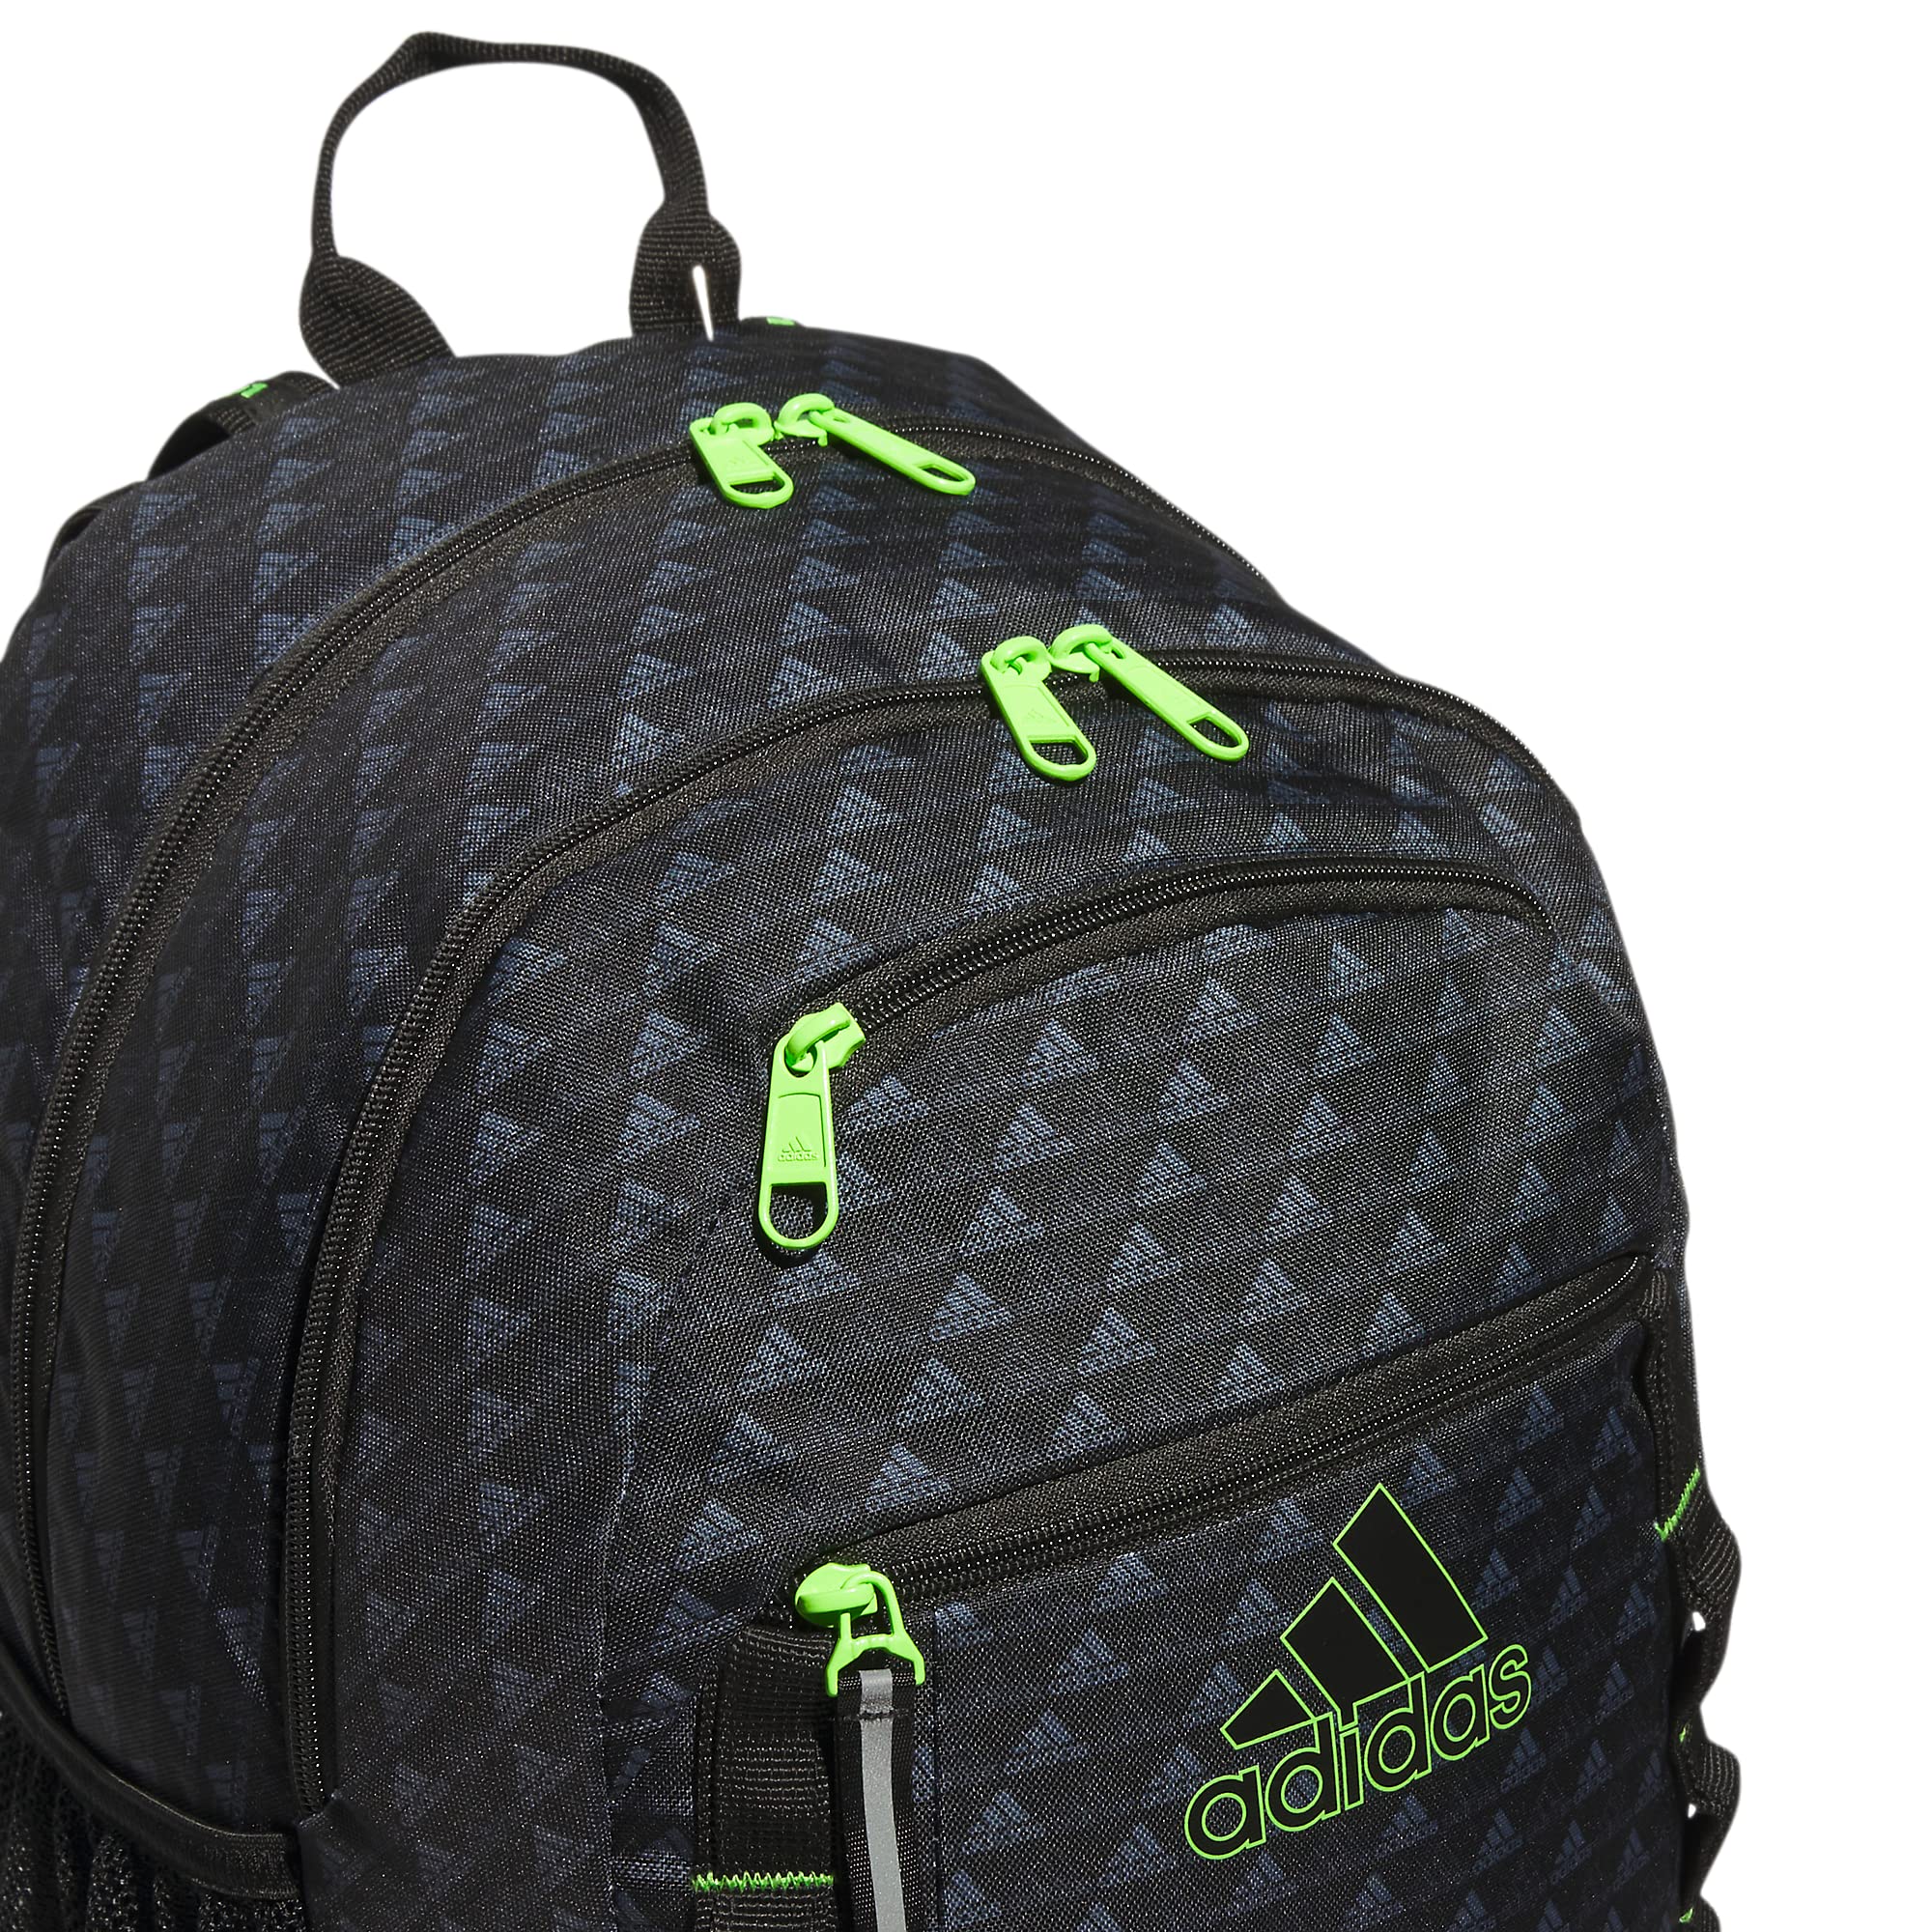 adidas Excel 6 Backpack, BOS Mini Monogram Black/Lucid Lime Green, One Size